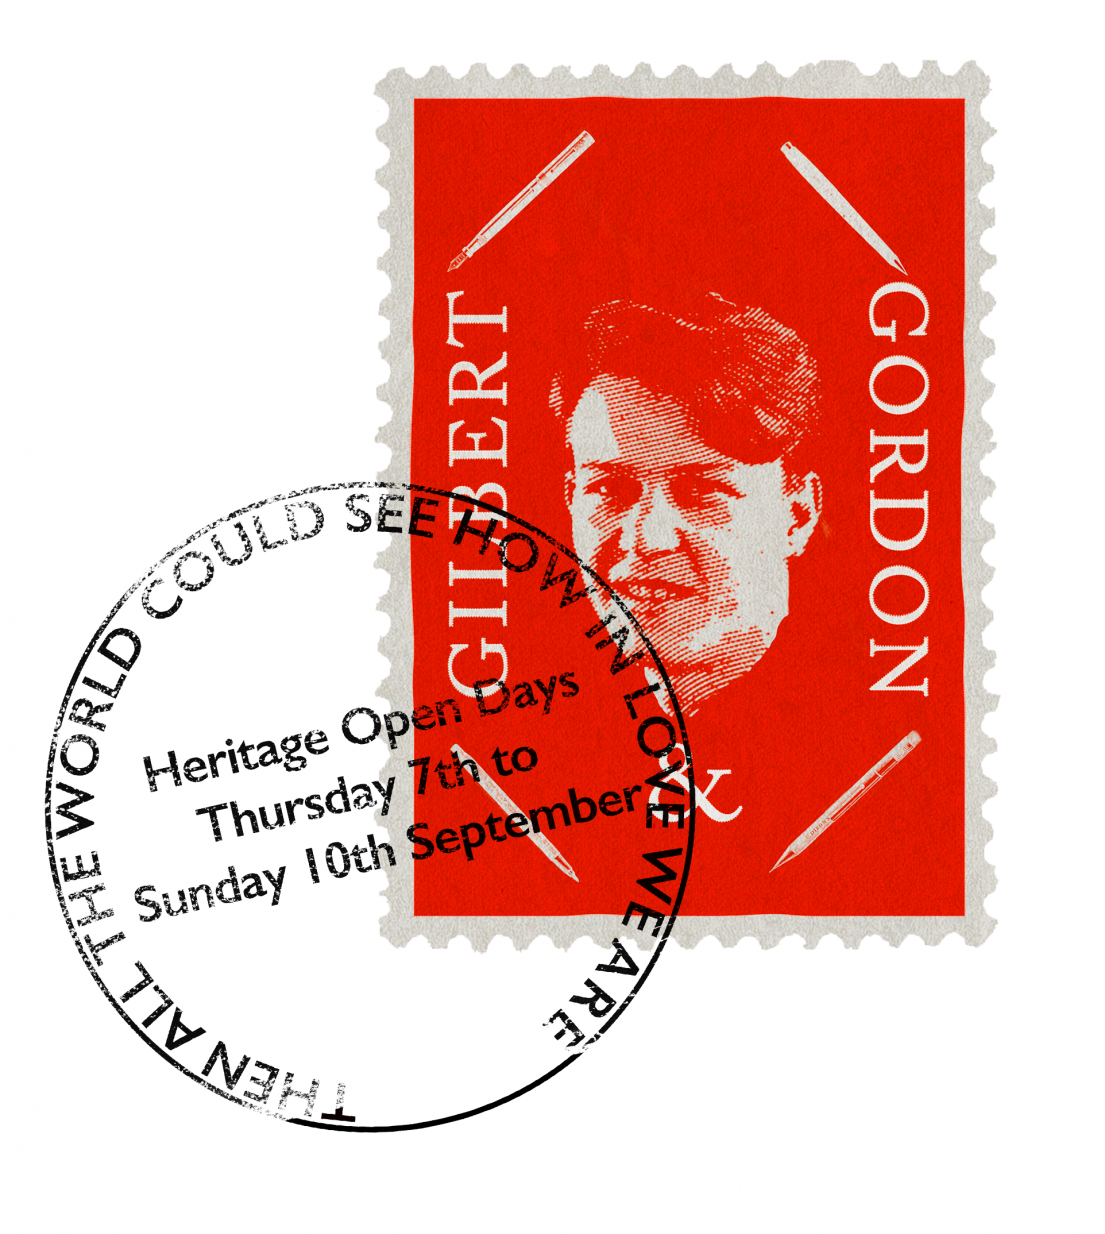 An image of a man, edited to blend into a red postage stamp. The stamp reads Gilbert & Gordon. 'Then all the world could see how in love we are'.